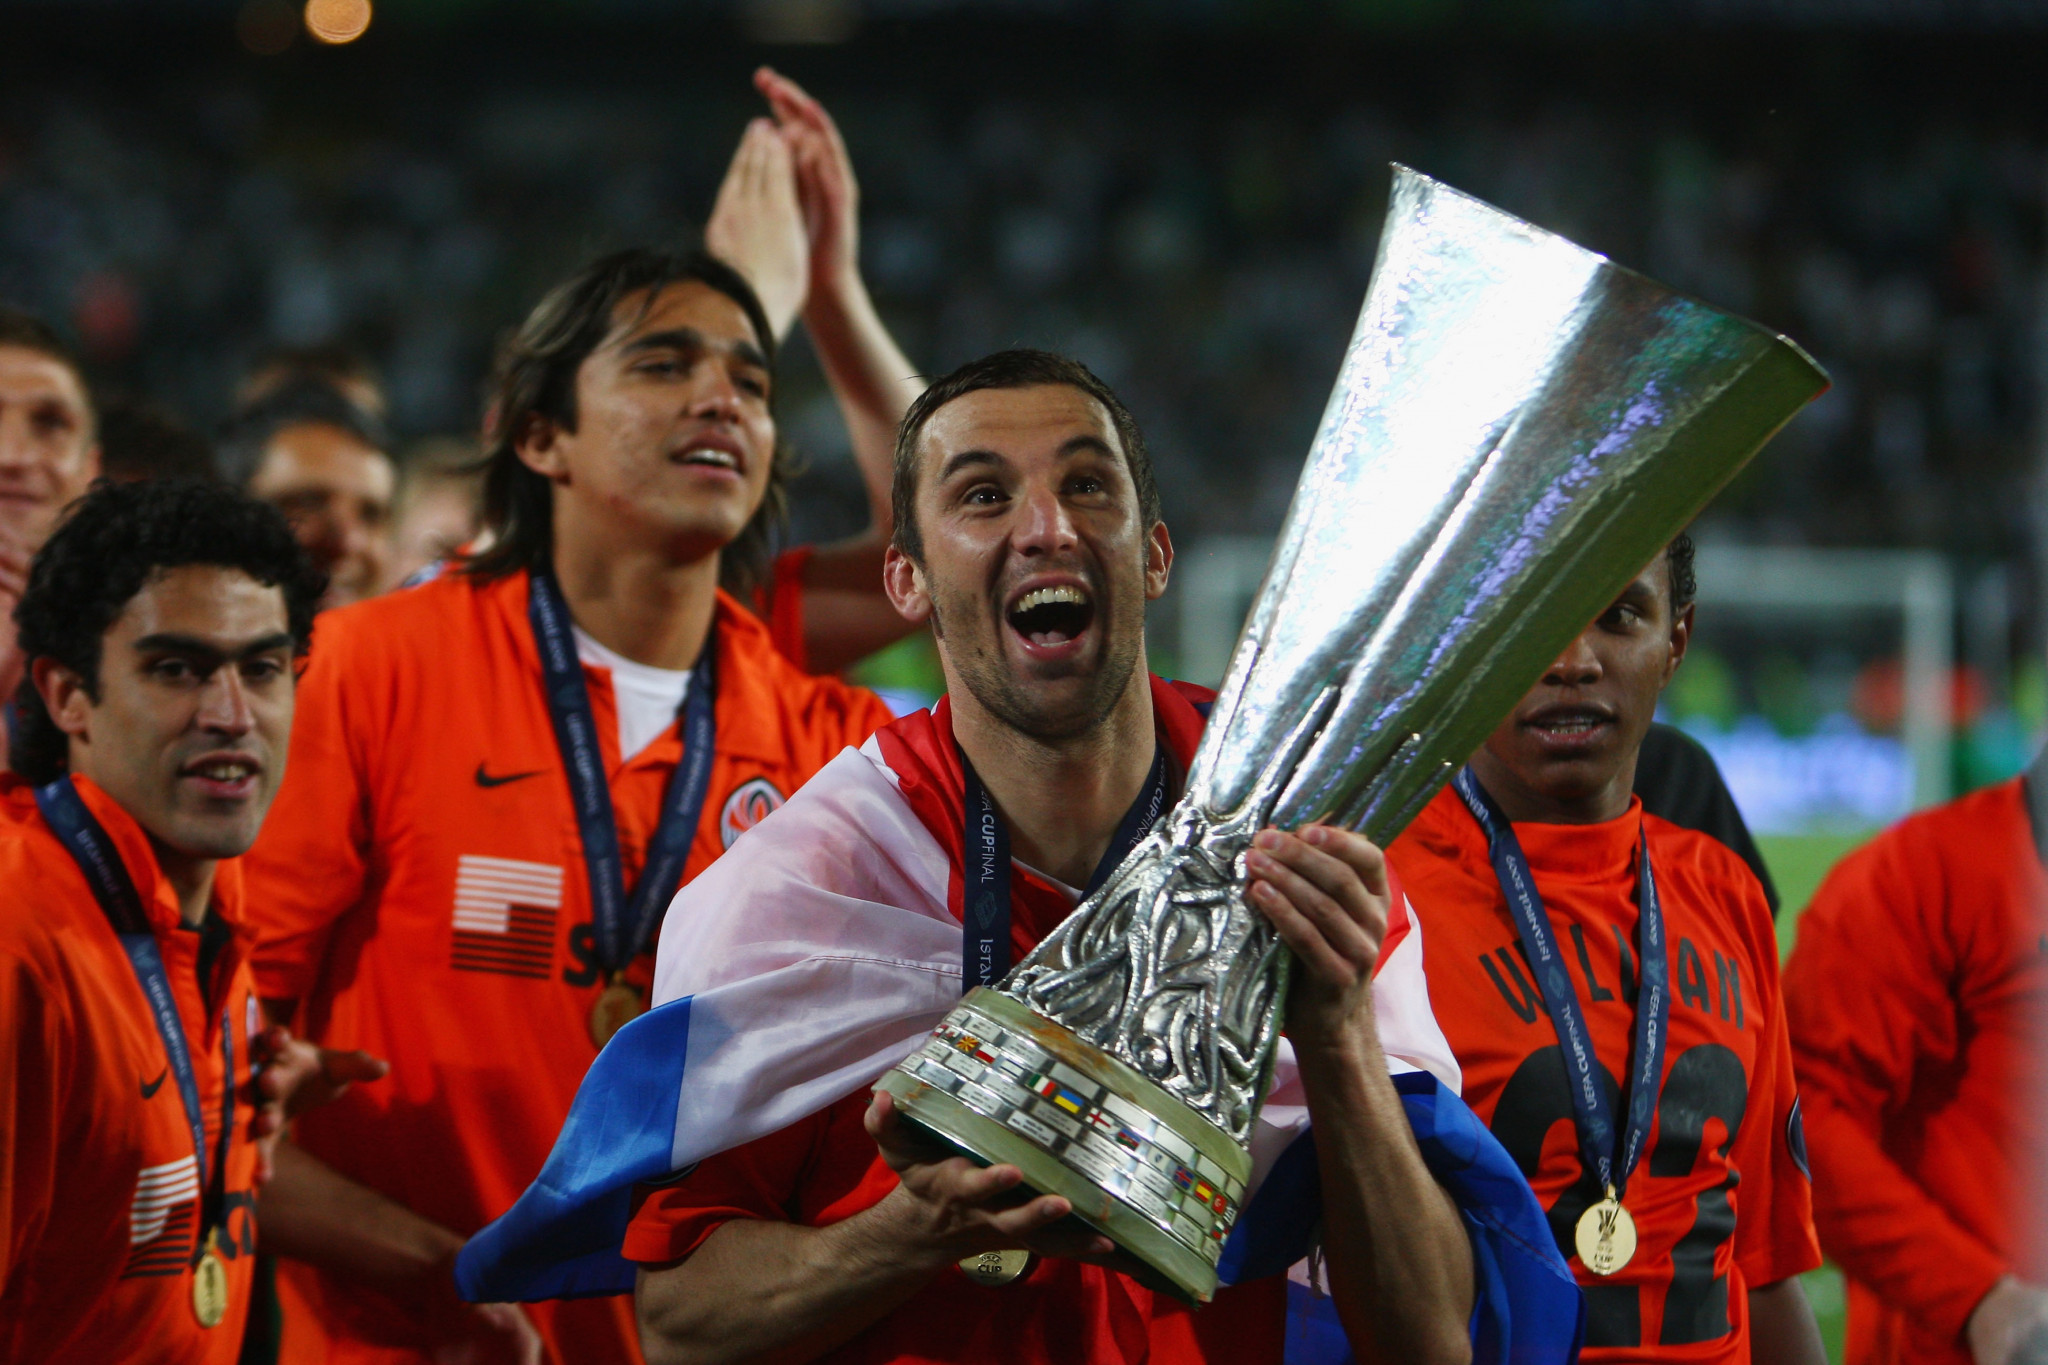 Shakhtar Donetsk won the UEFA Cup in 2009, beating Werder Bremen ©Getty Images